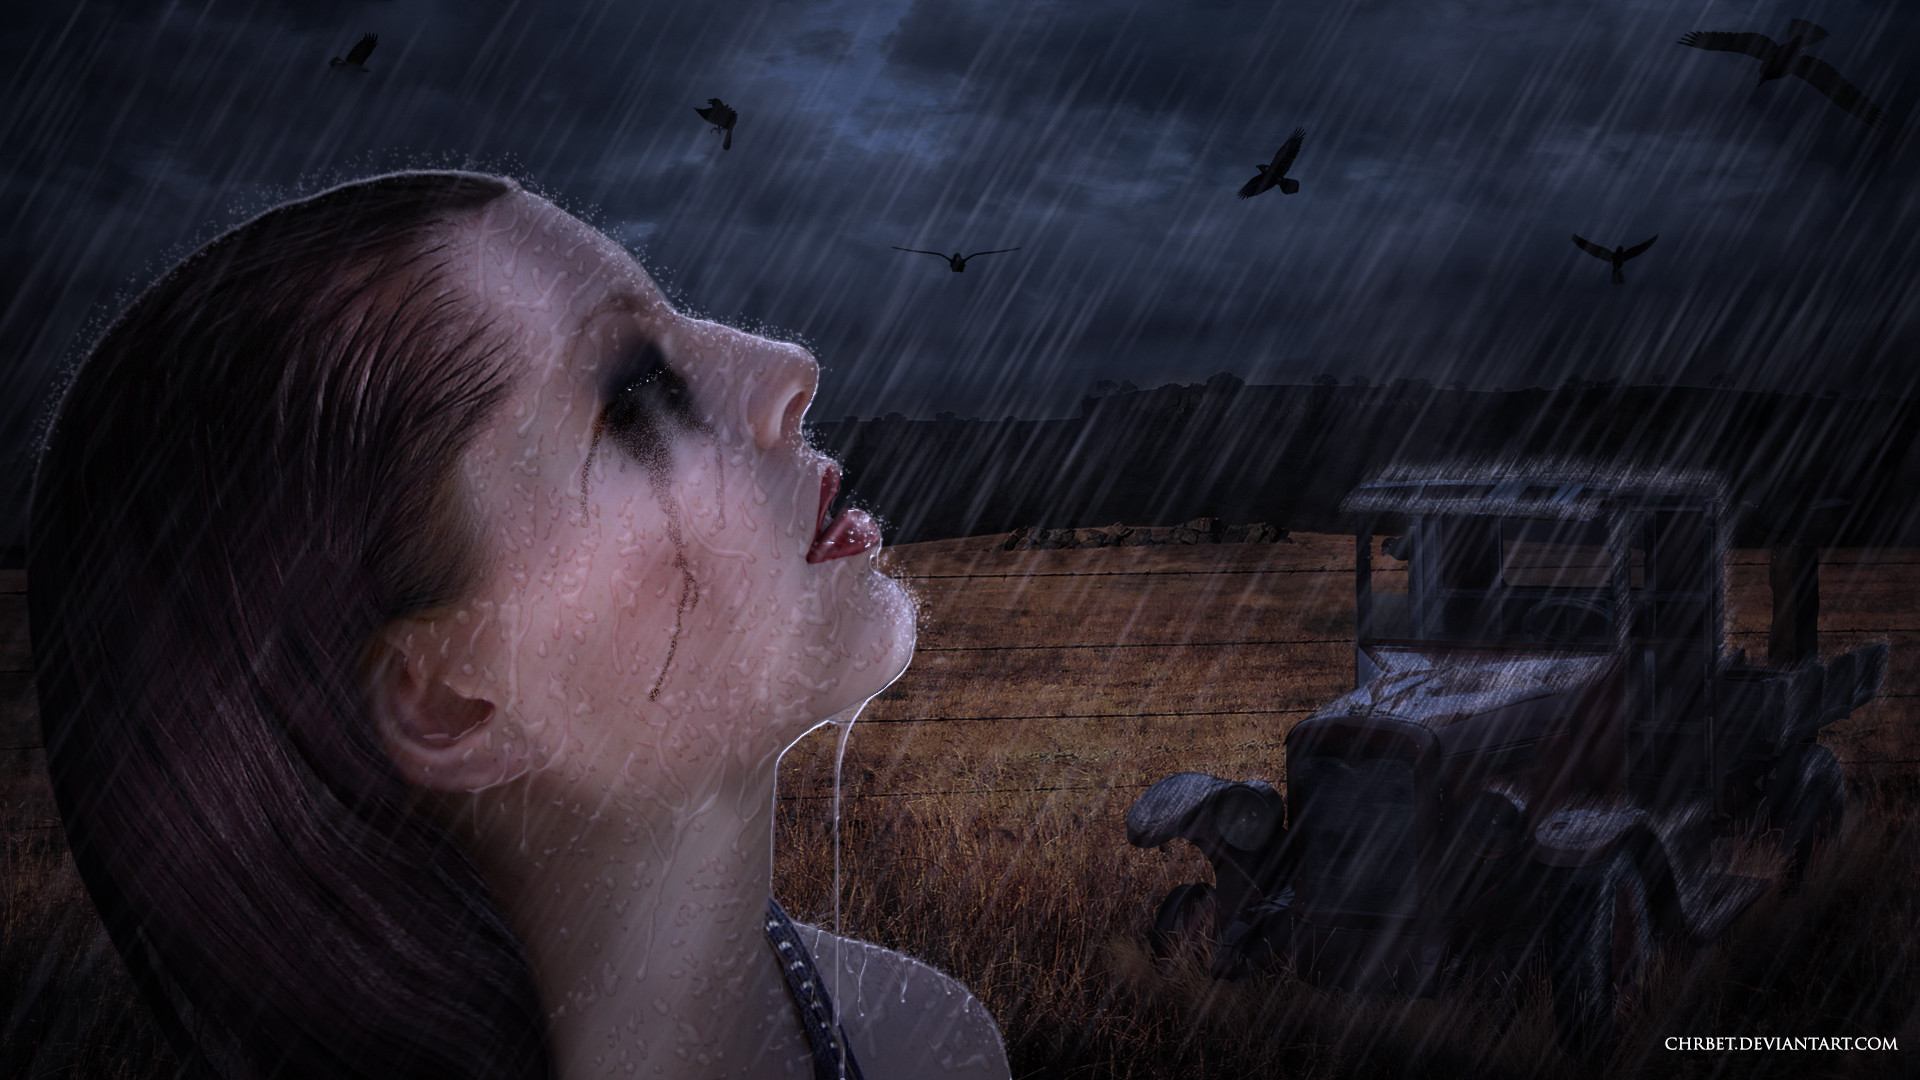 1920x1080 Crying girl in rainy day wallpaper from Dark wallpapers